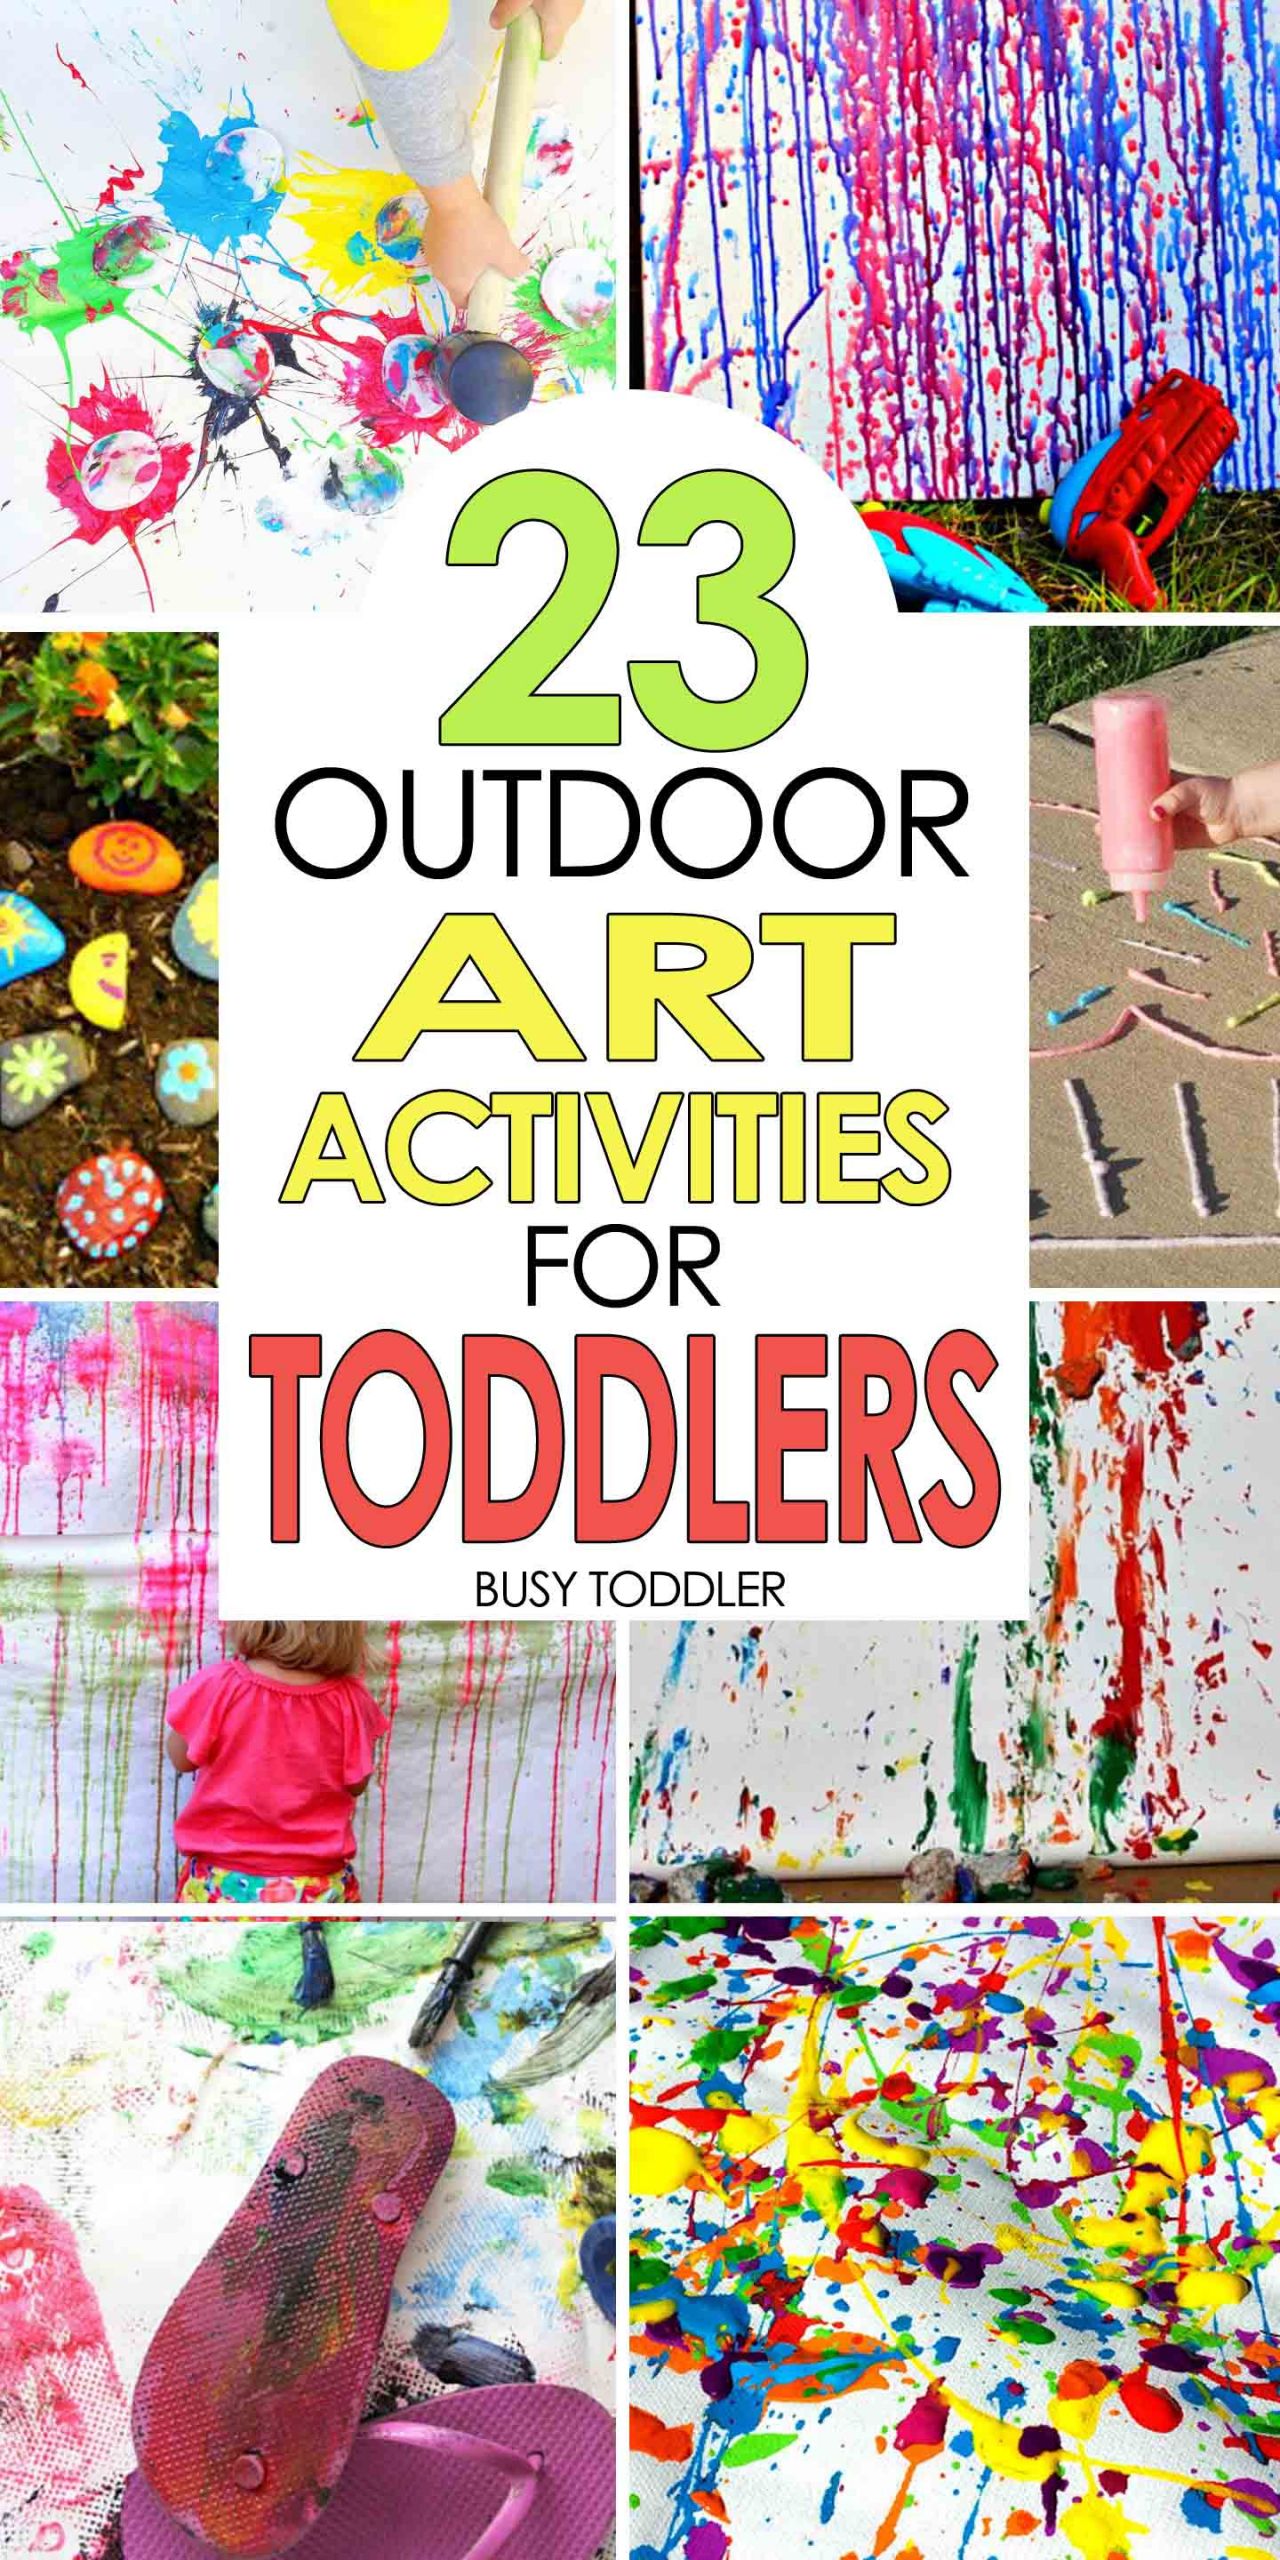 Spring Art Activities For Toddlers
 50 Awesome Summer Activities for Toddlers Busy Toddler